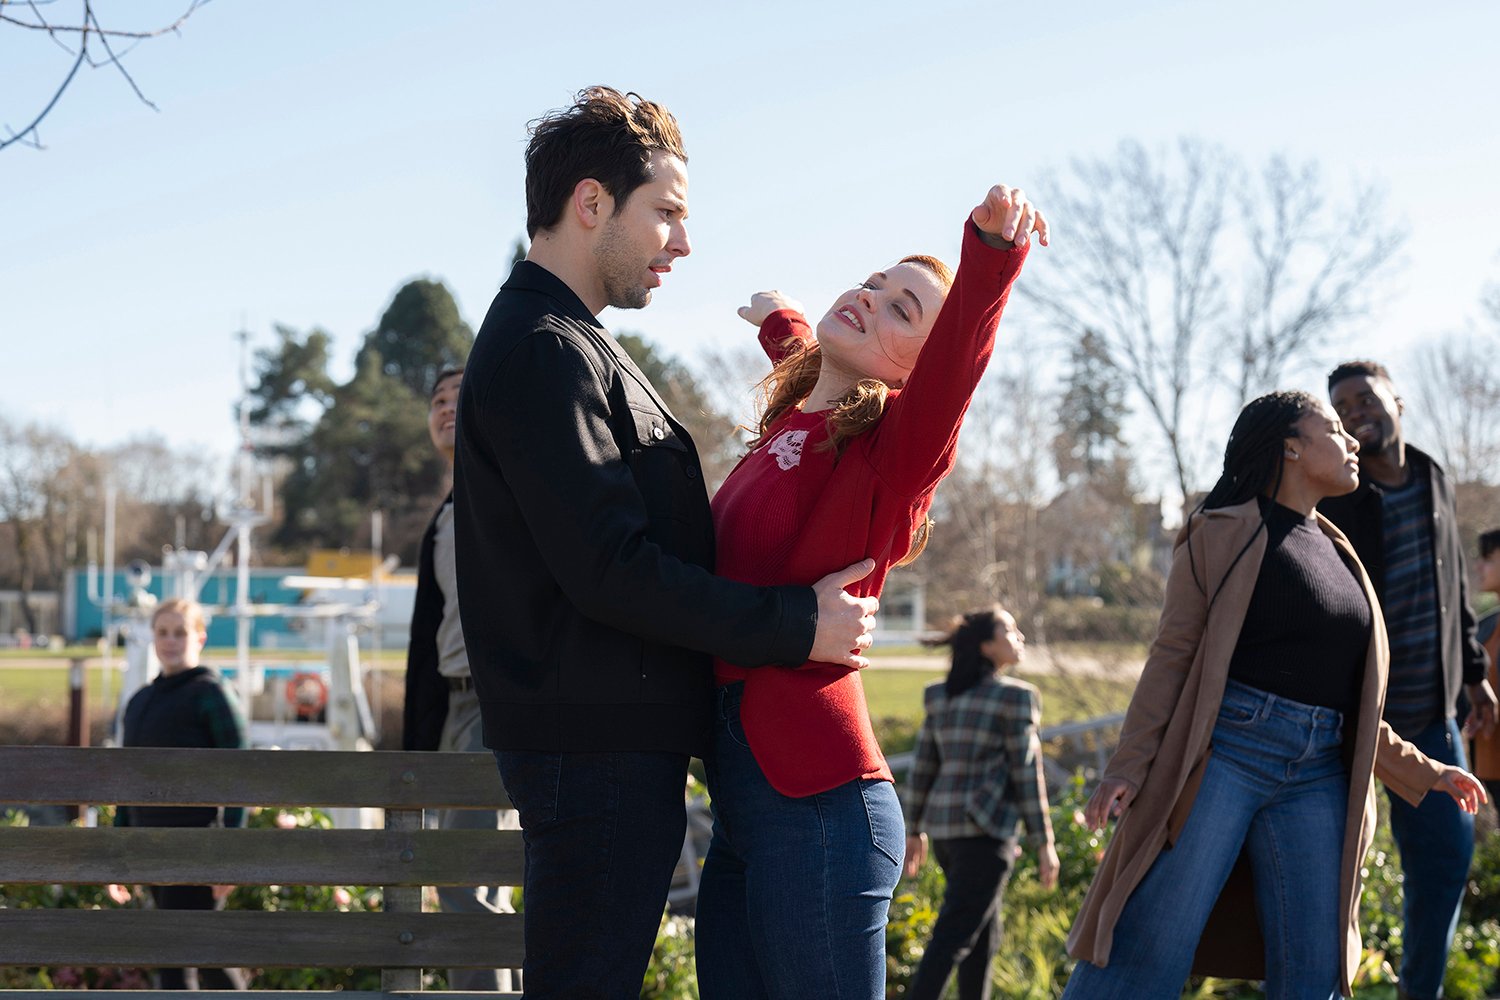 Skylar Astin as Max and Jane Levy as Zoey in Zoey's Extraordinary Playlist ahead of the Zoey's Extraordinary Christmas movie